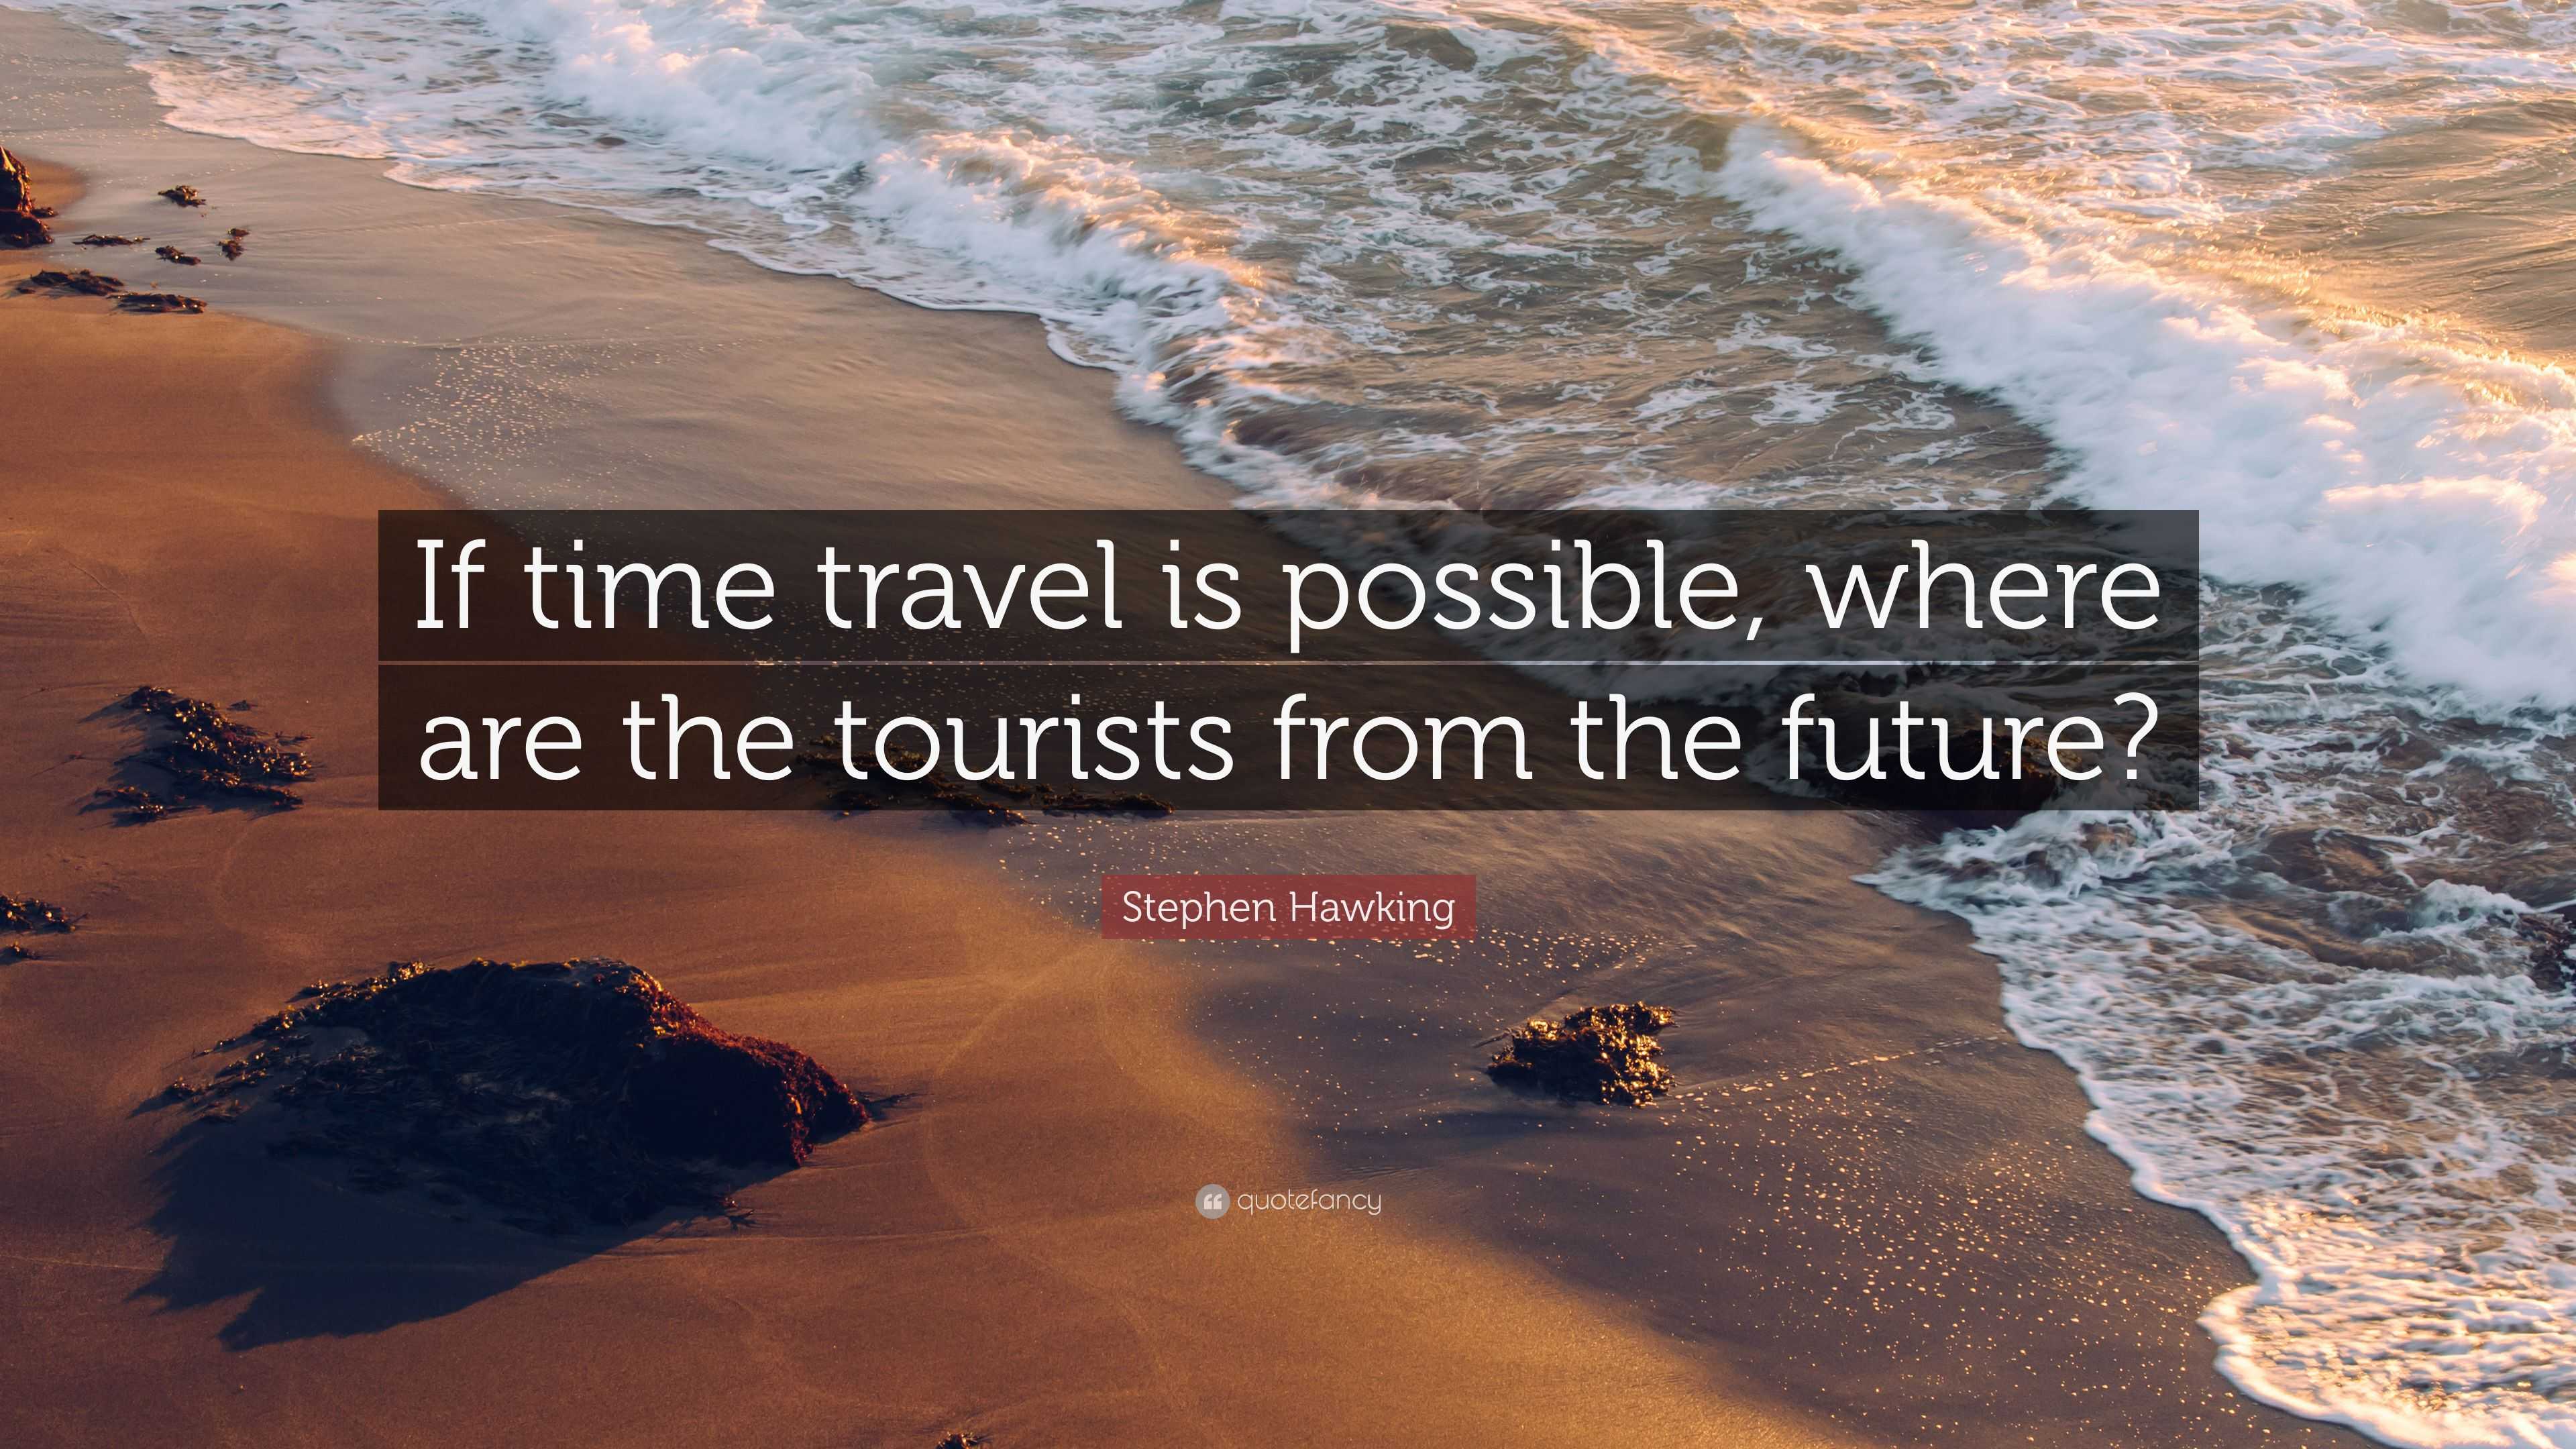 is time travel possible into the future